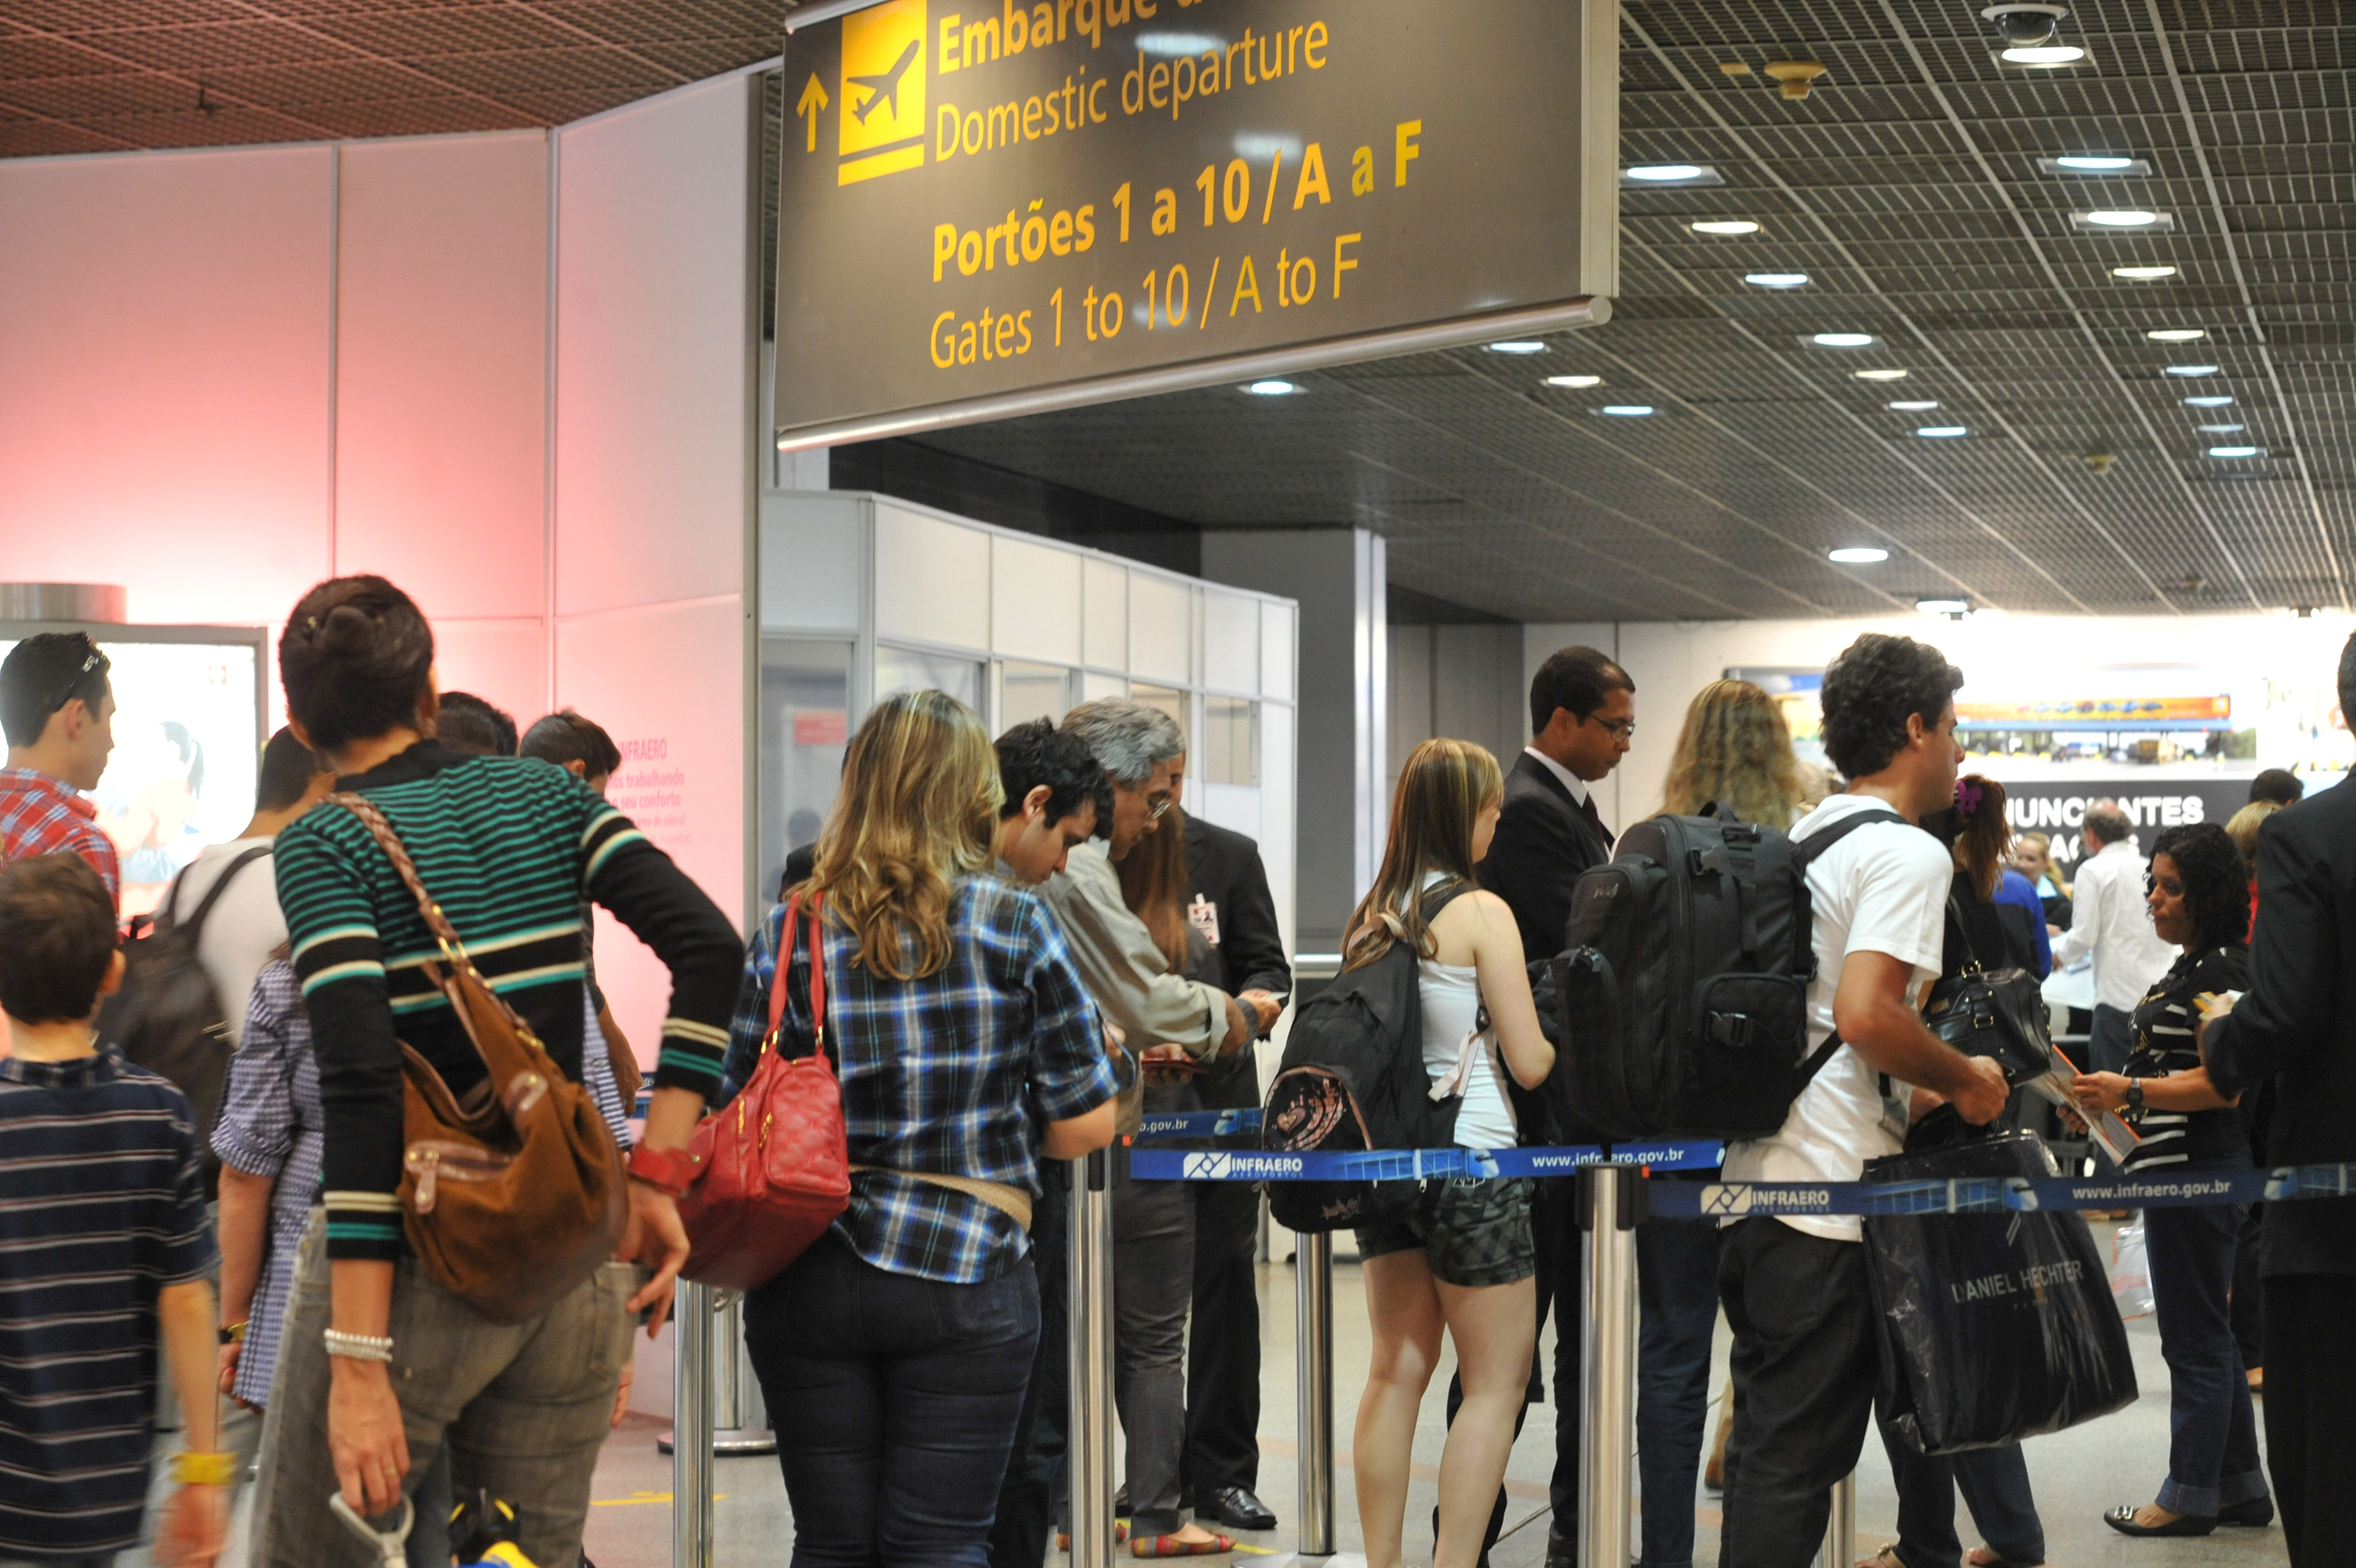 Brazilians to be Taxed 25 Percent on Travel Services Abroad